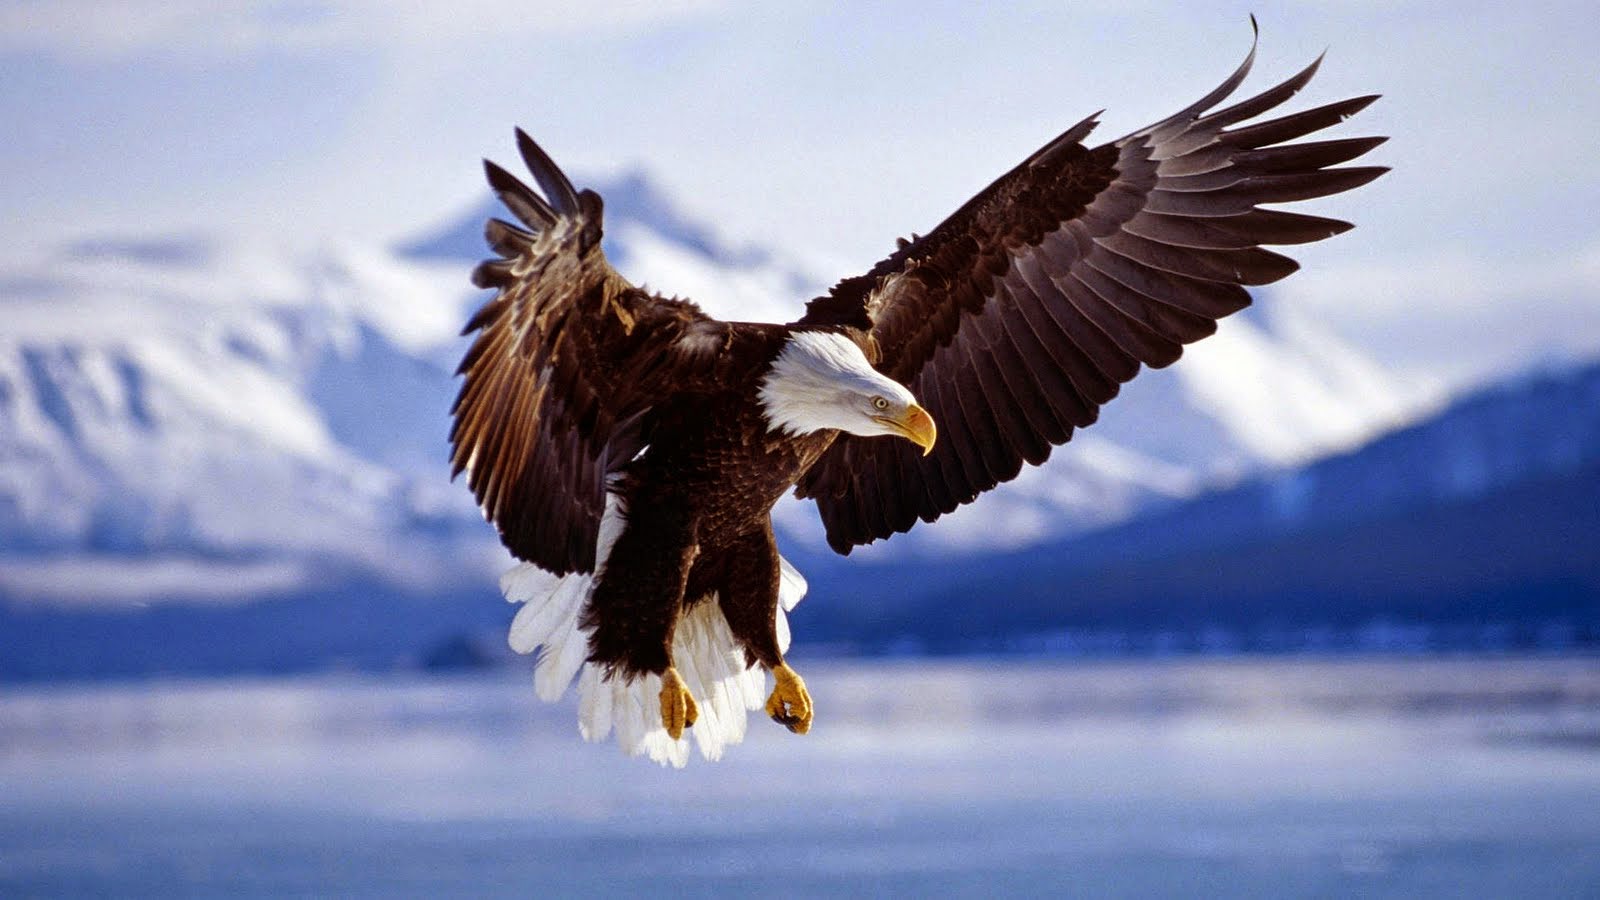 Beautiful Bald Eagle Wallpapers Free Download | FREE ALL HD WALLPAPERS